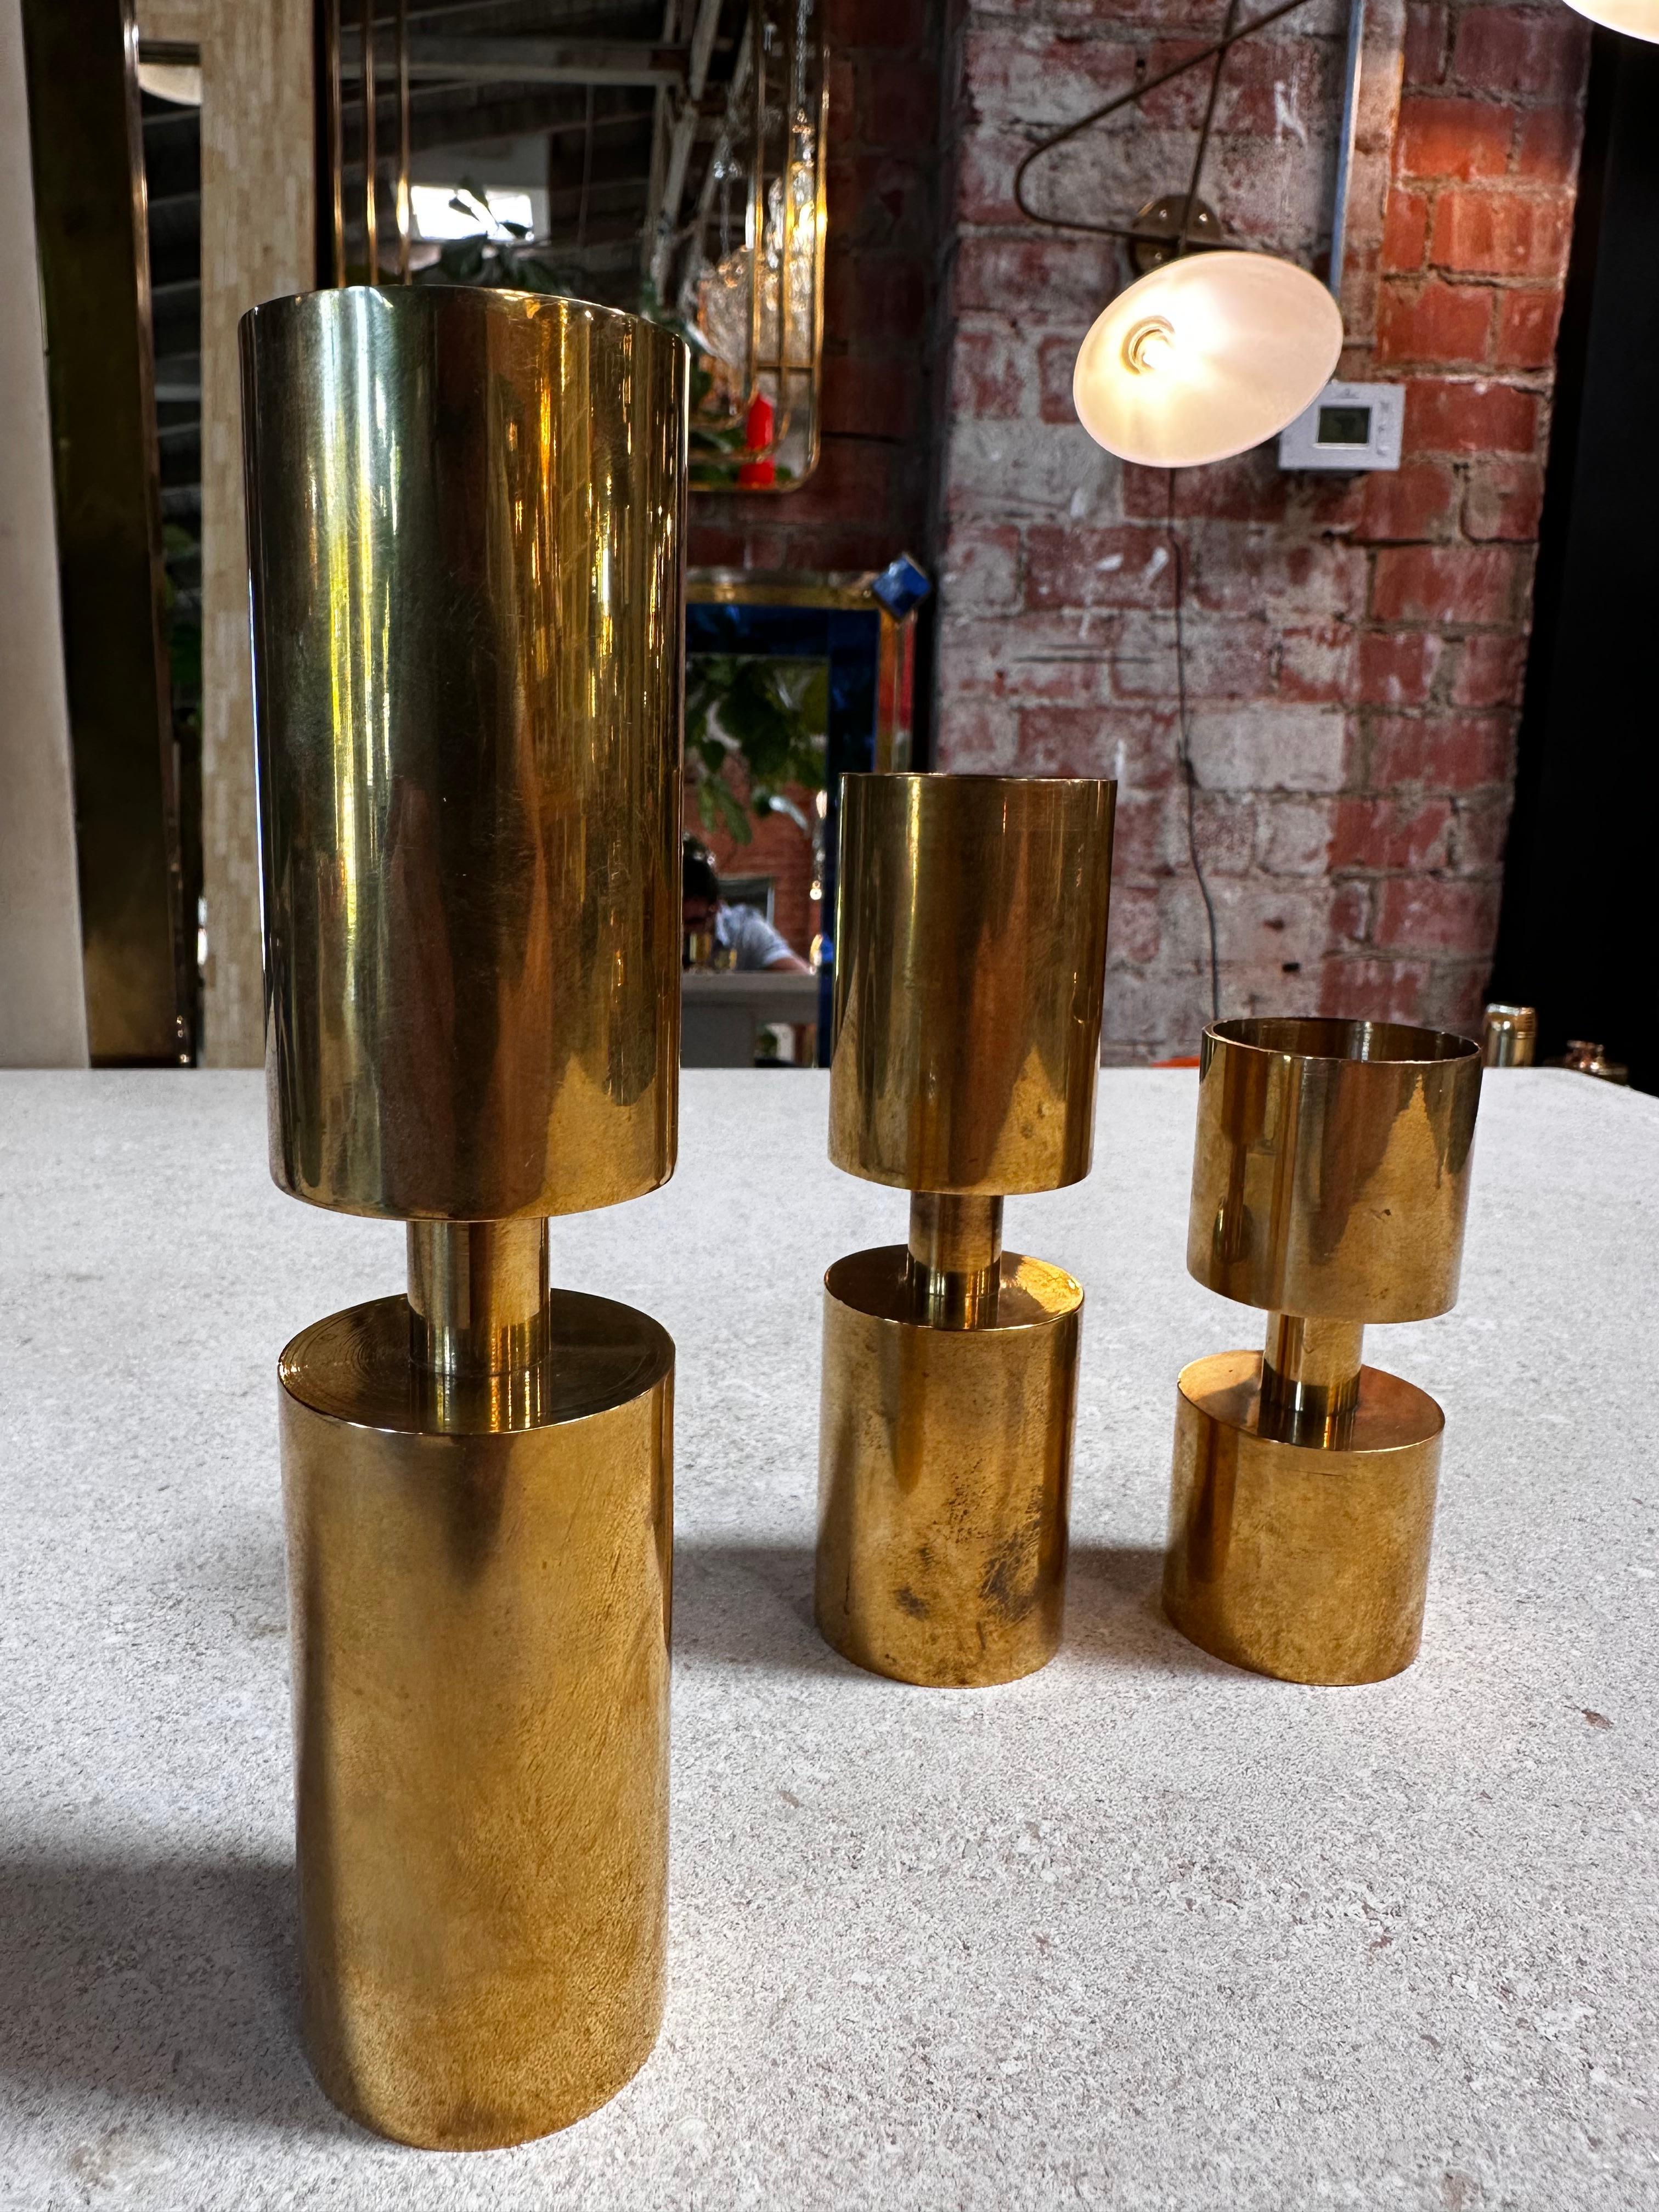 Swedish Set of 3 Brass Candle Holders by Thelma Zoéga for Zoégas Kaffe 1970s